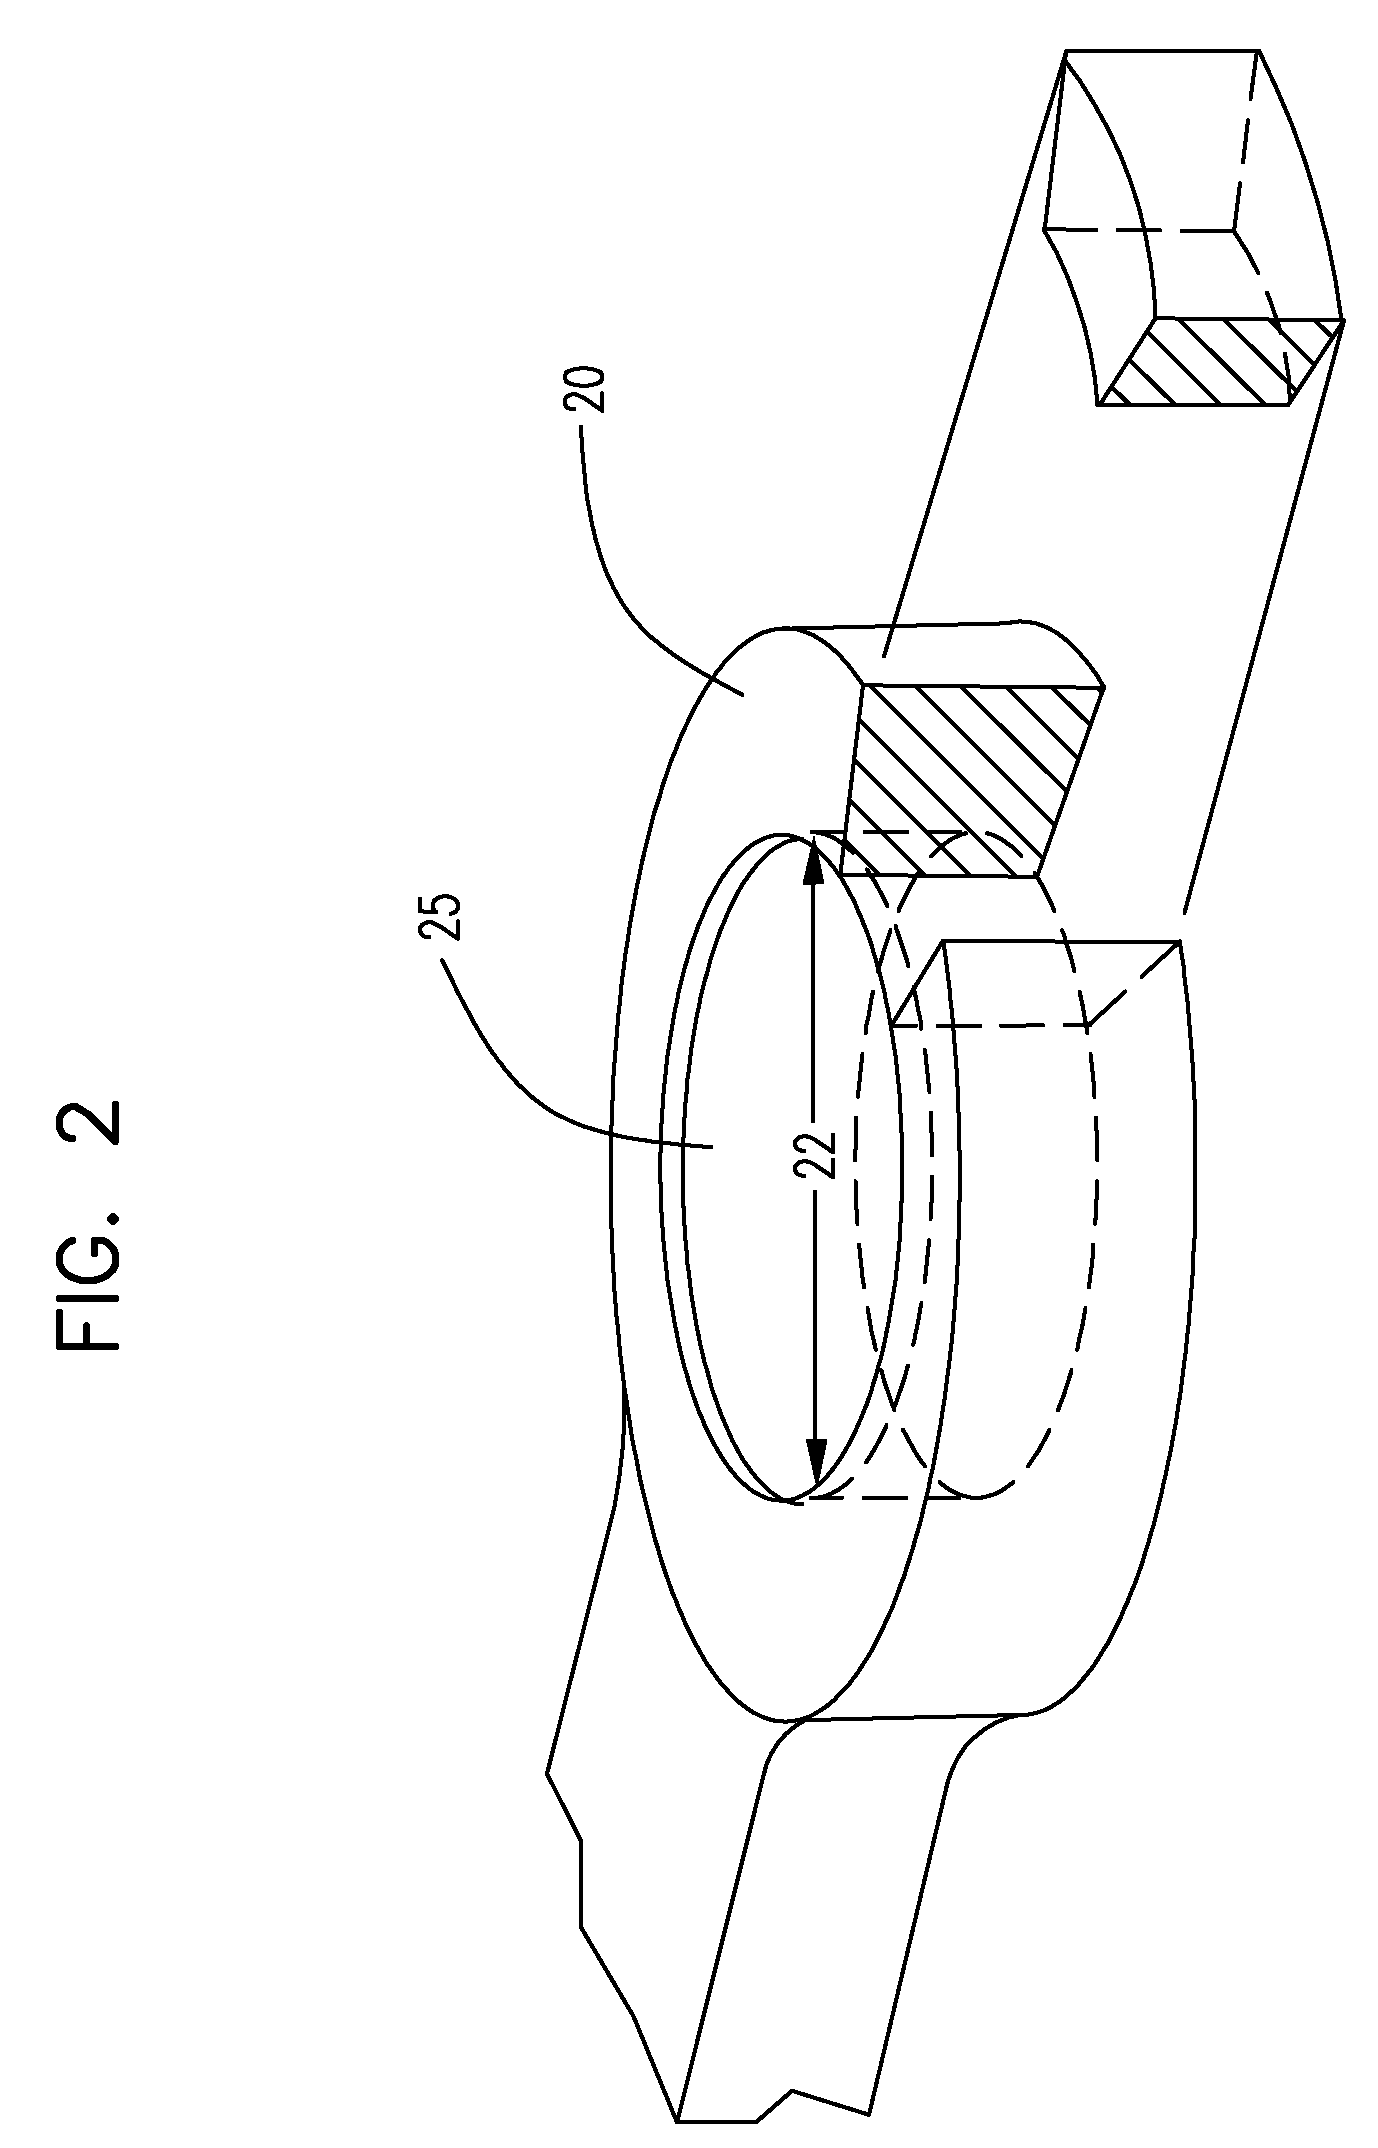 Method of Attaching Radiopaque Markers to Intraluminal Medical Devices, and Devices Formed Using the Same